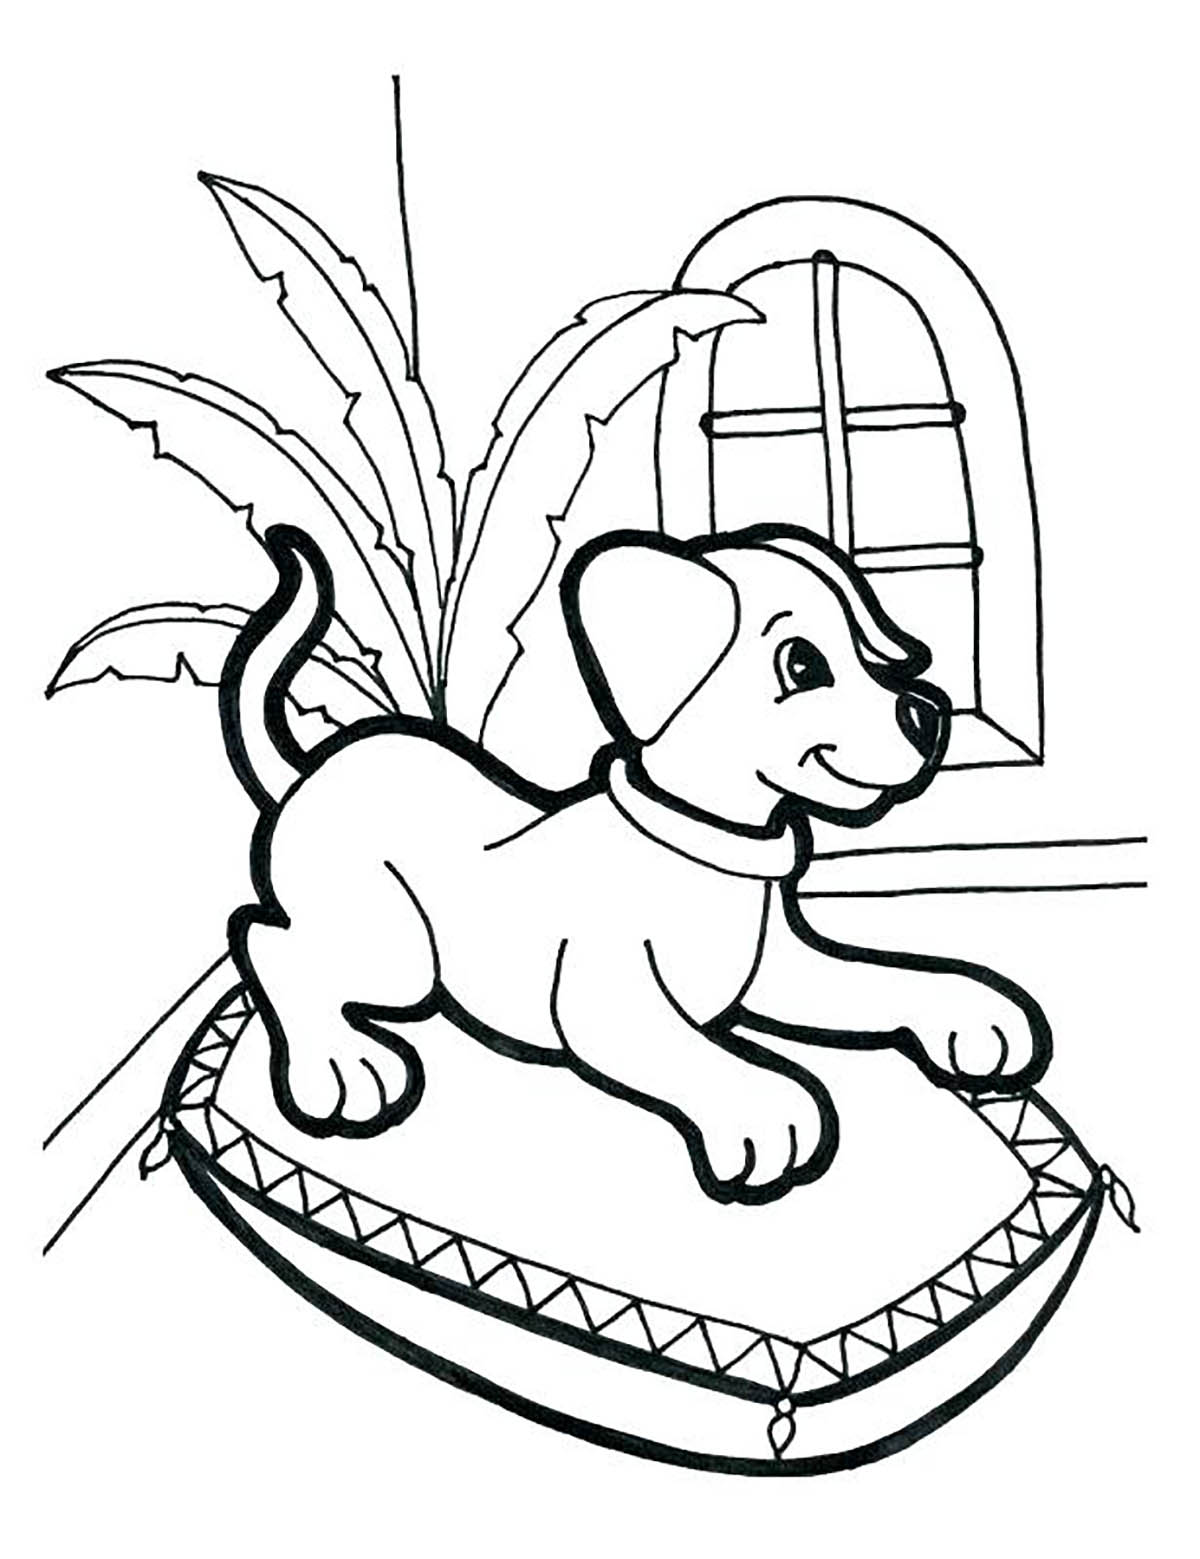 Download Dog to print : obedient dog - Dogs Kids Coloring Pages